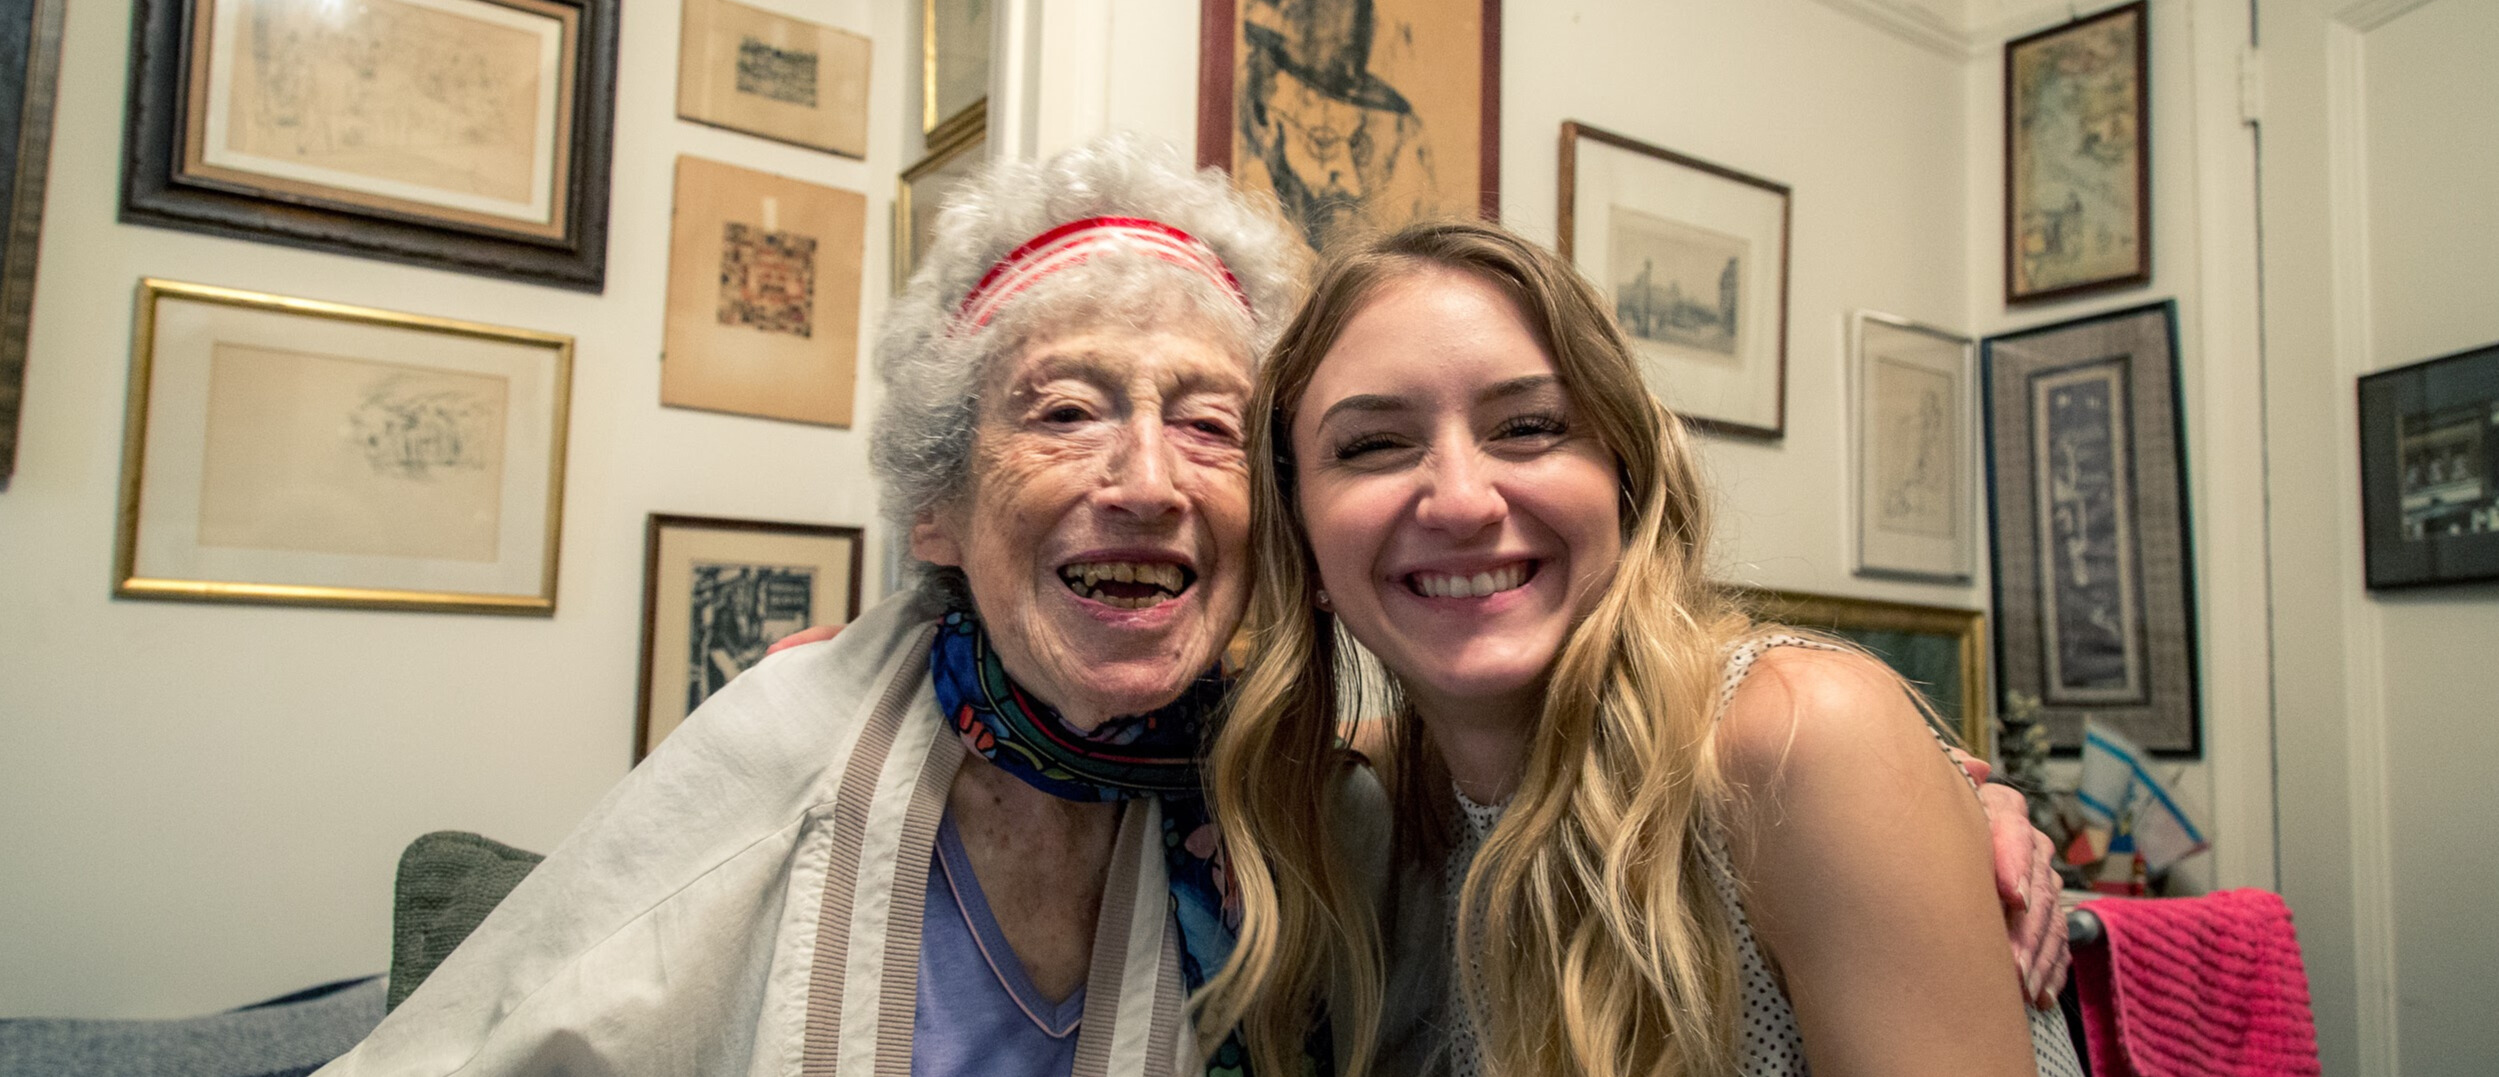 a DOROT participant and young volunteer smiling together